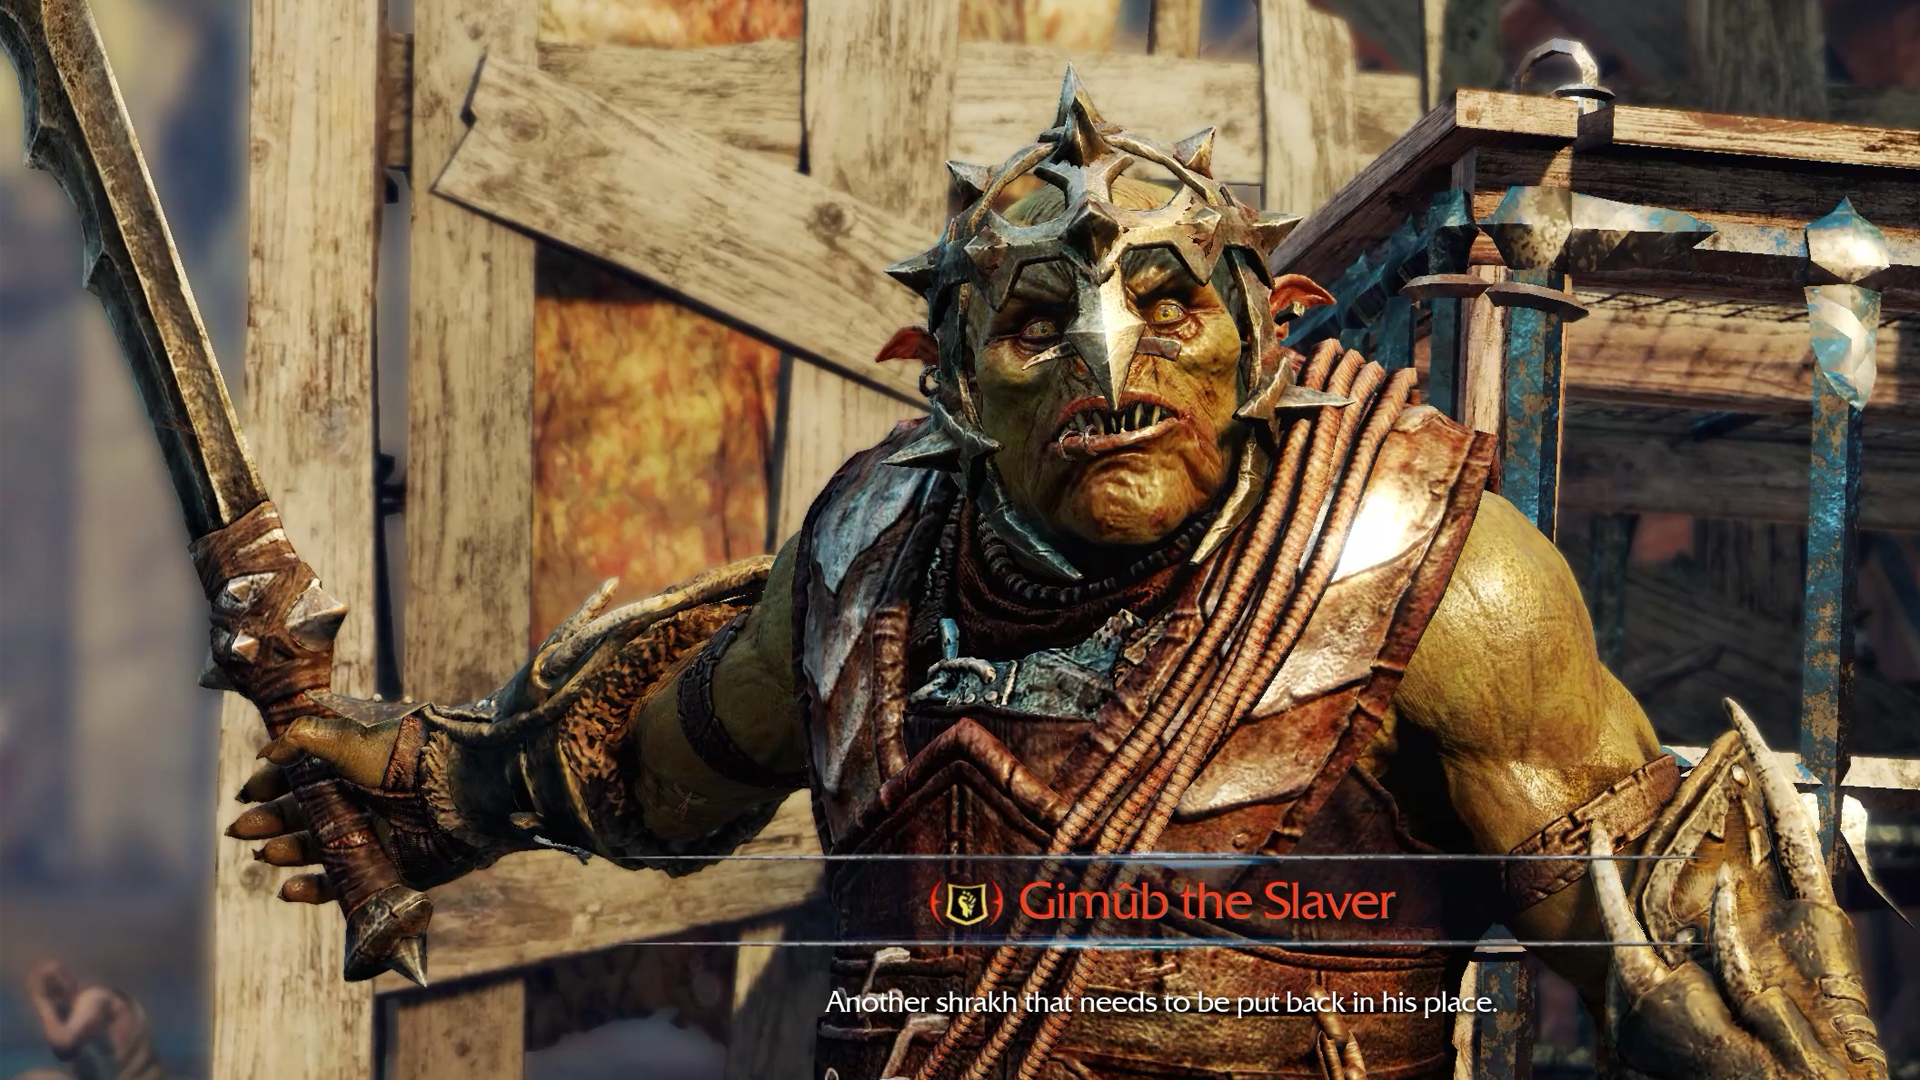 Shadow of Mordor's Nemesis system is amazing--here's how it works